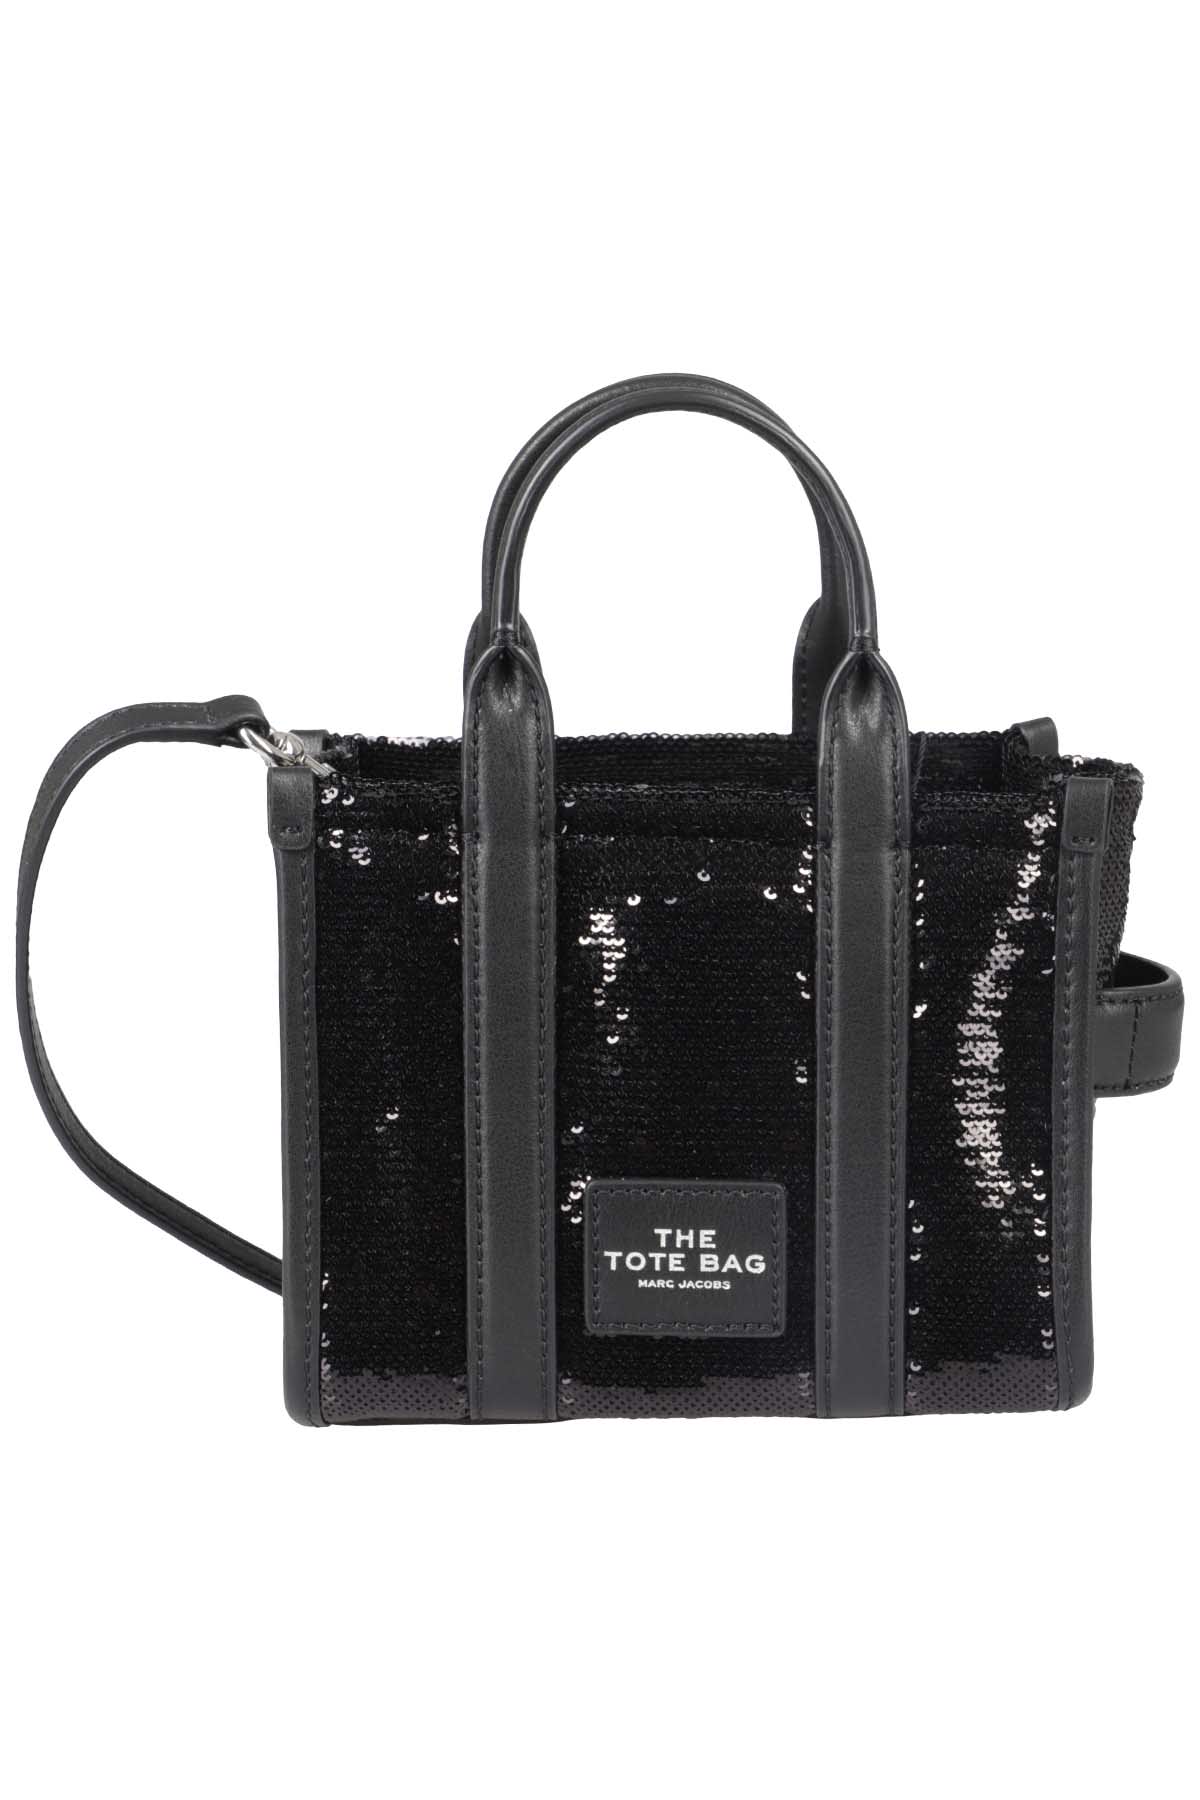 MARC JACOBS THE MICRO TOTE